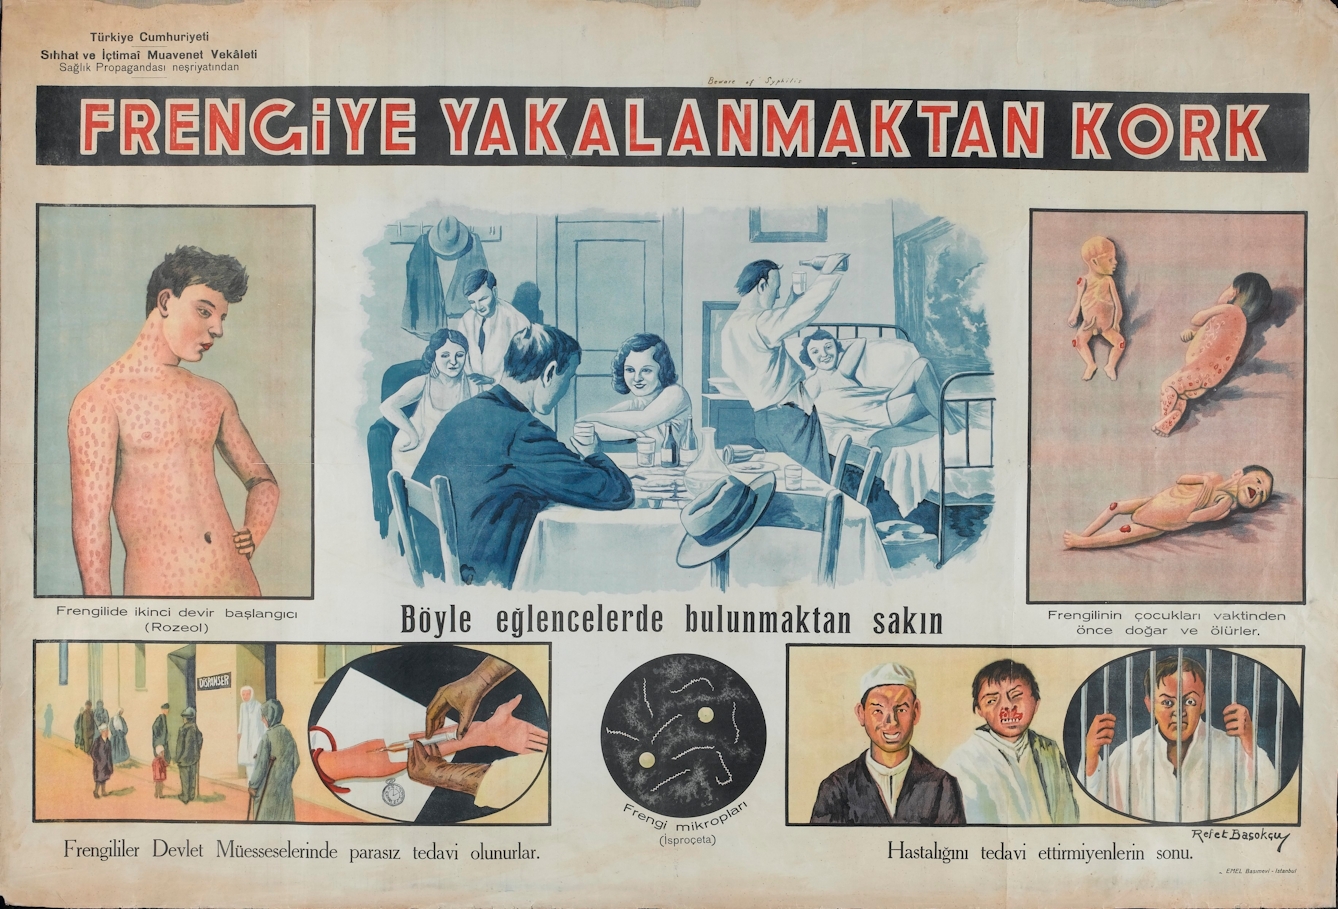 Poster showing six vignettes in two rows, each with lettering below. Upper row, left to right: a young man with the pink rash ("Rozeol") of syphilitic papilloma; young men and women partying with alcohol in a bedsit, typical conditions for transmission of syphilis; infants with hereditary syphilis. Lower row, people attending a dispensary for treatment of sexually transmitted diseases; the spirochete of syphilis seen through a microscope; three men, two of them with their faces eaten away by syphilis, the third behind bars in prison